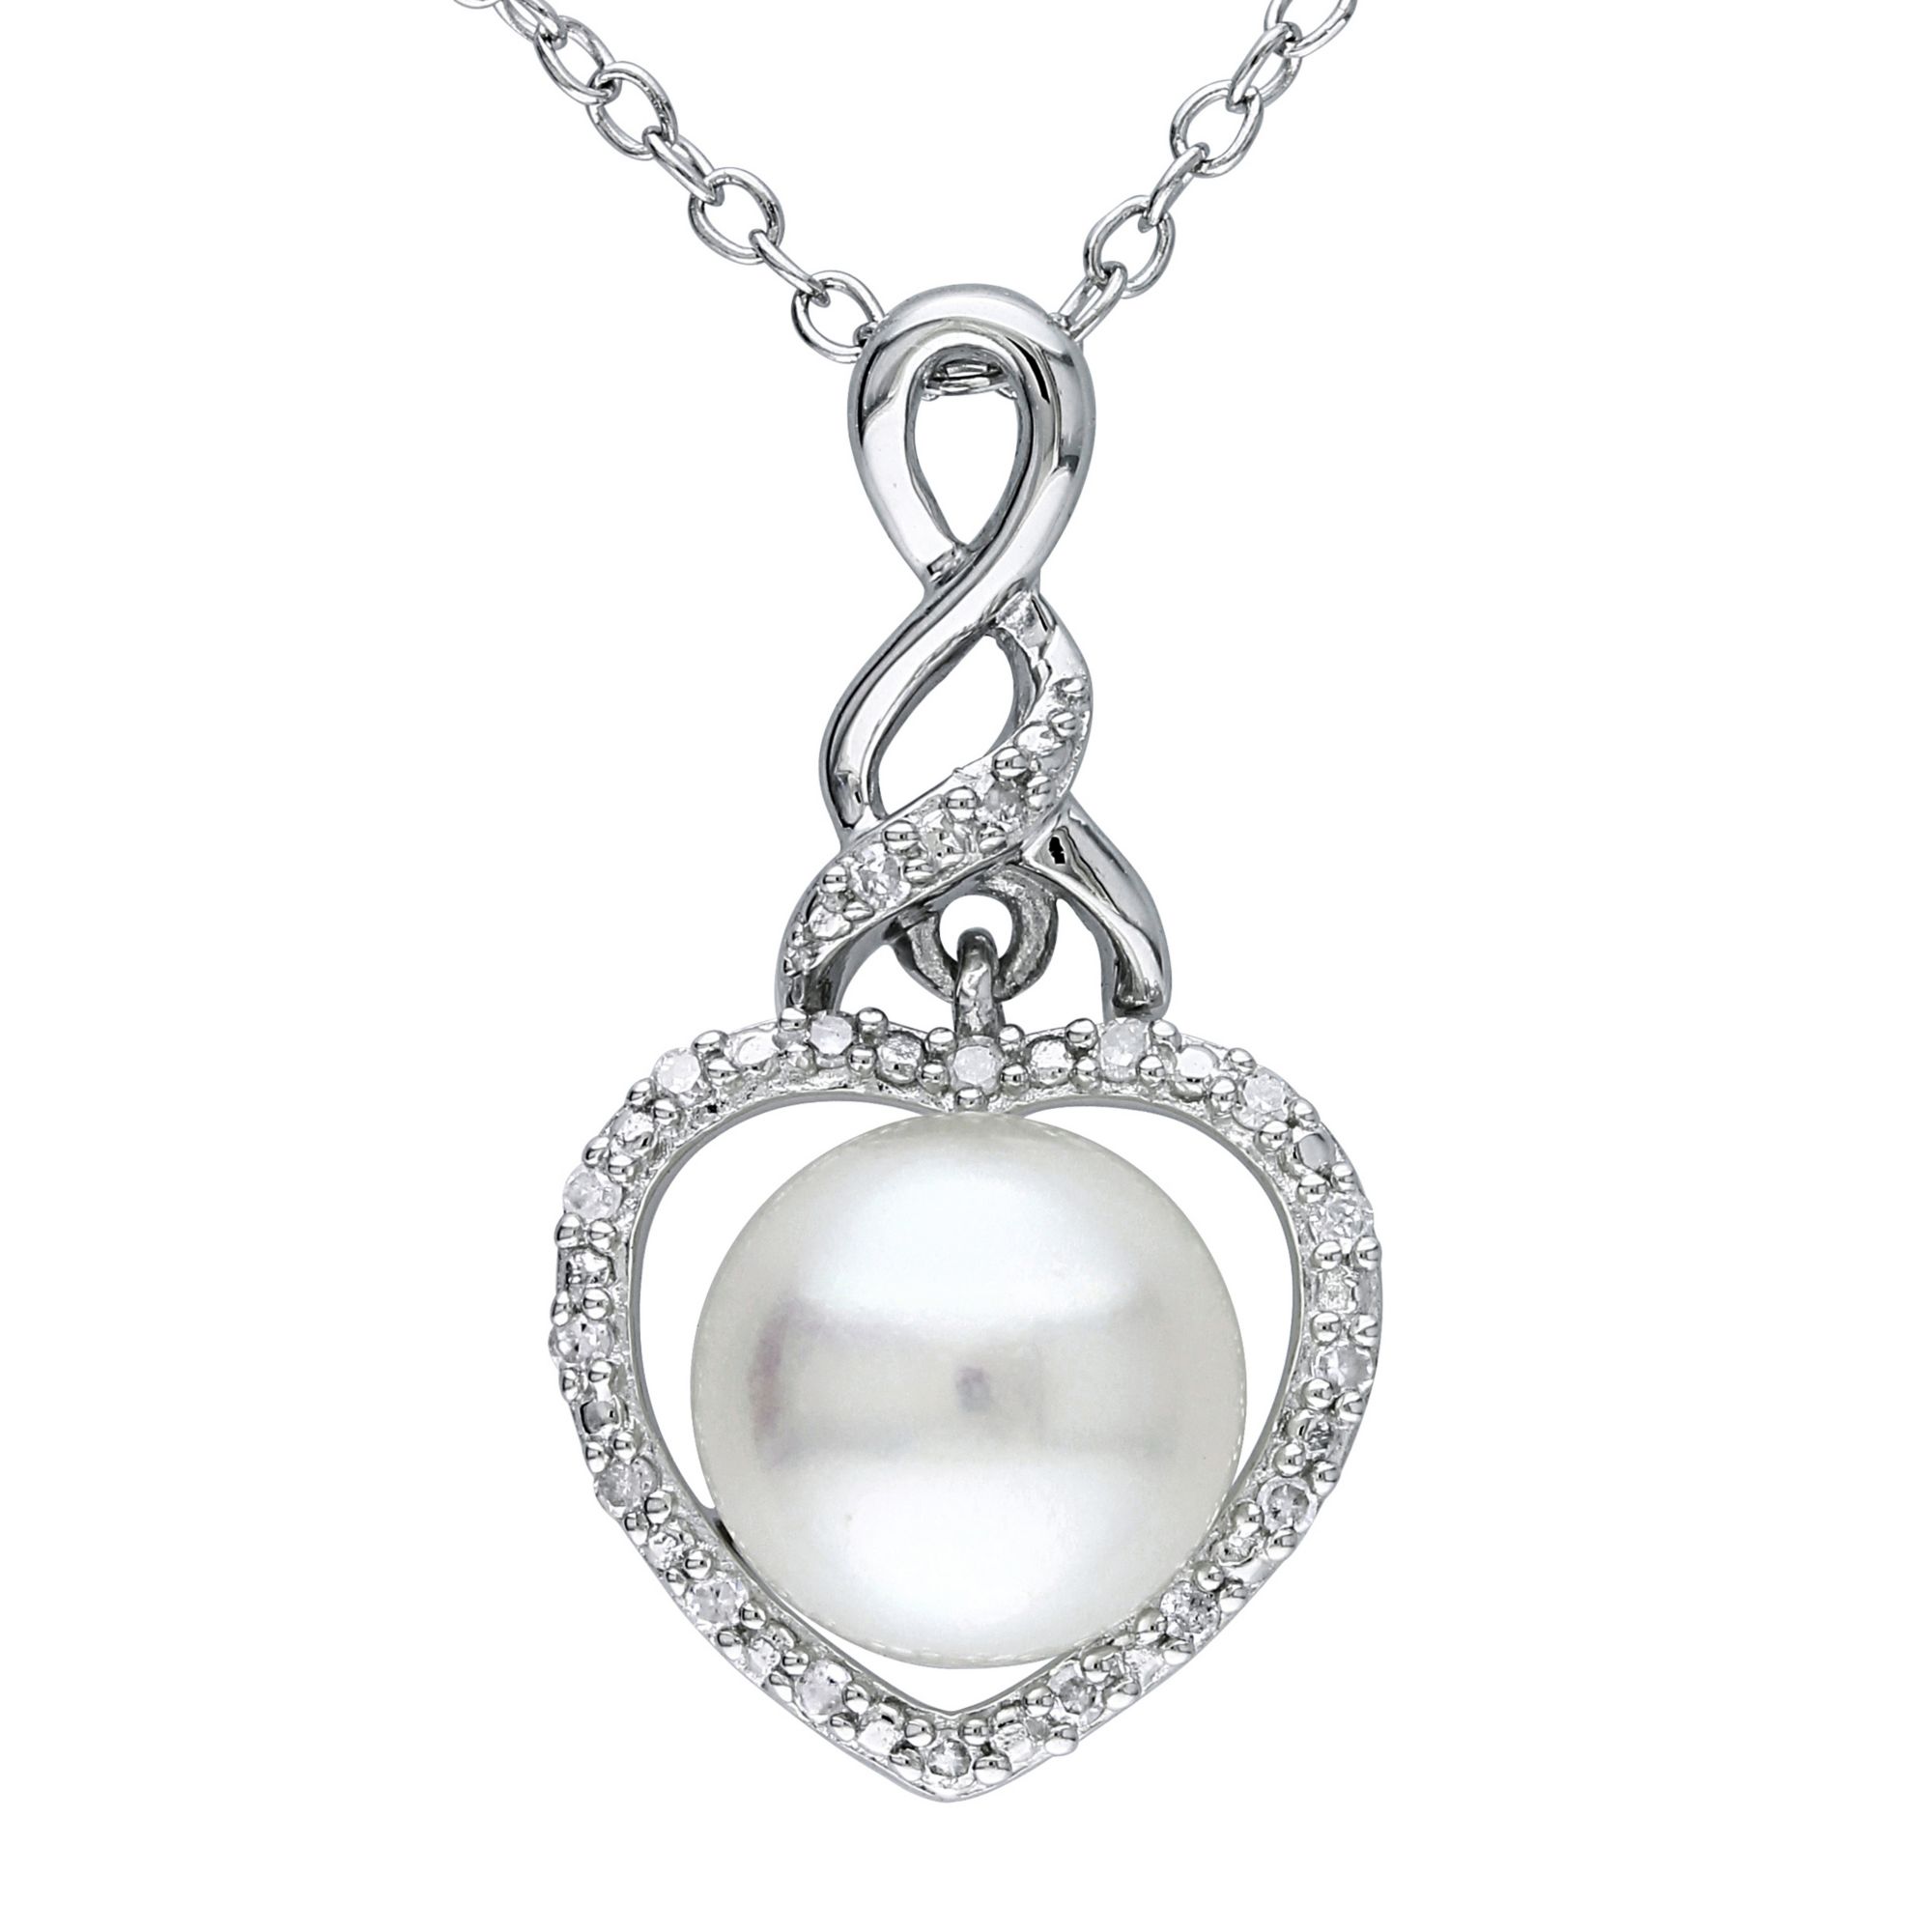 8-8.5 mm Cultured Freshwater Pearl and Diamond Heart Necklace in Sterling Silver